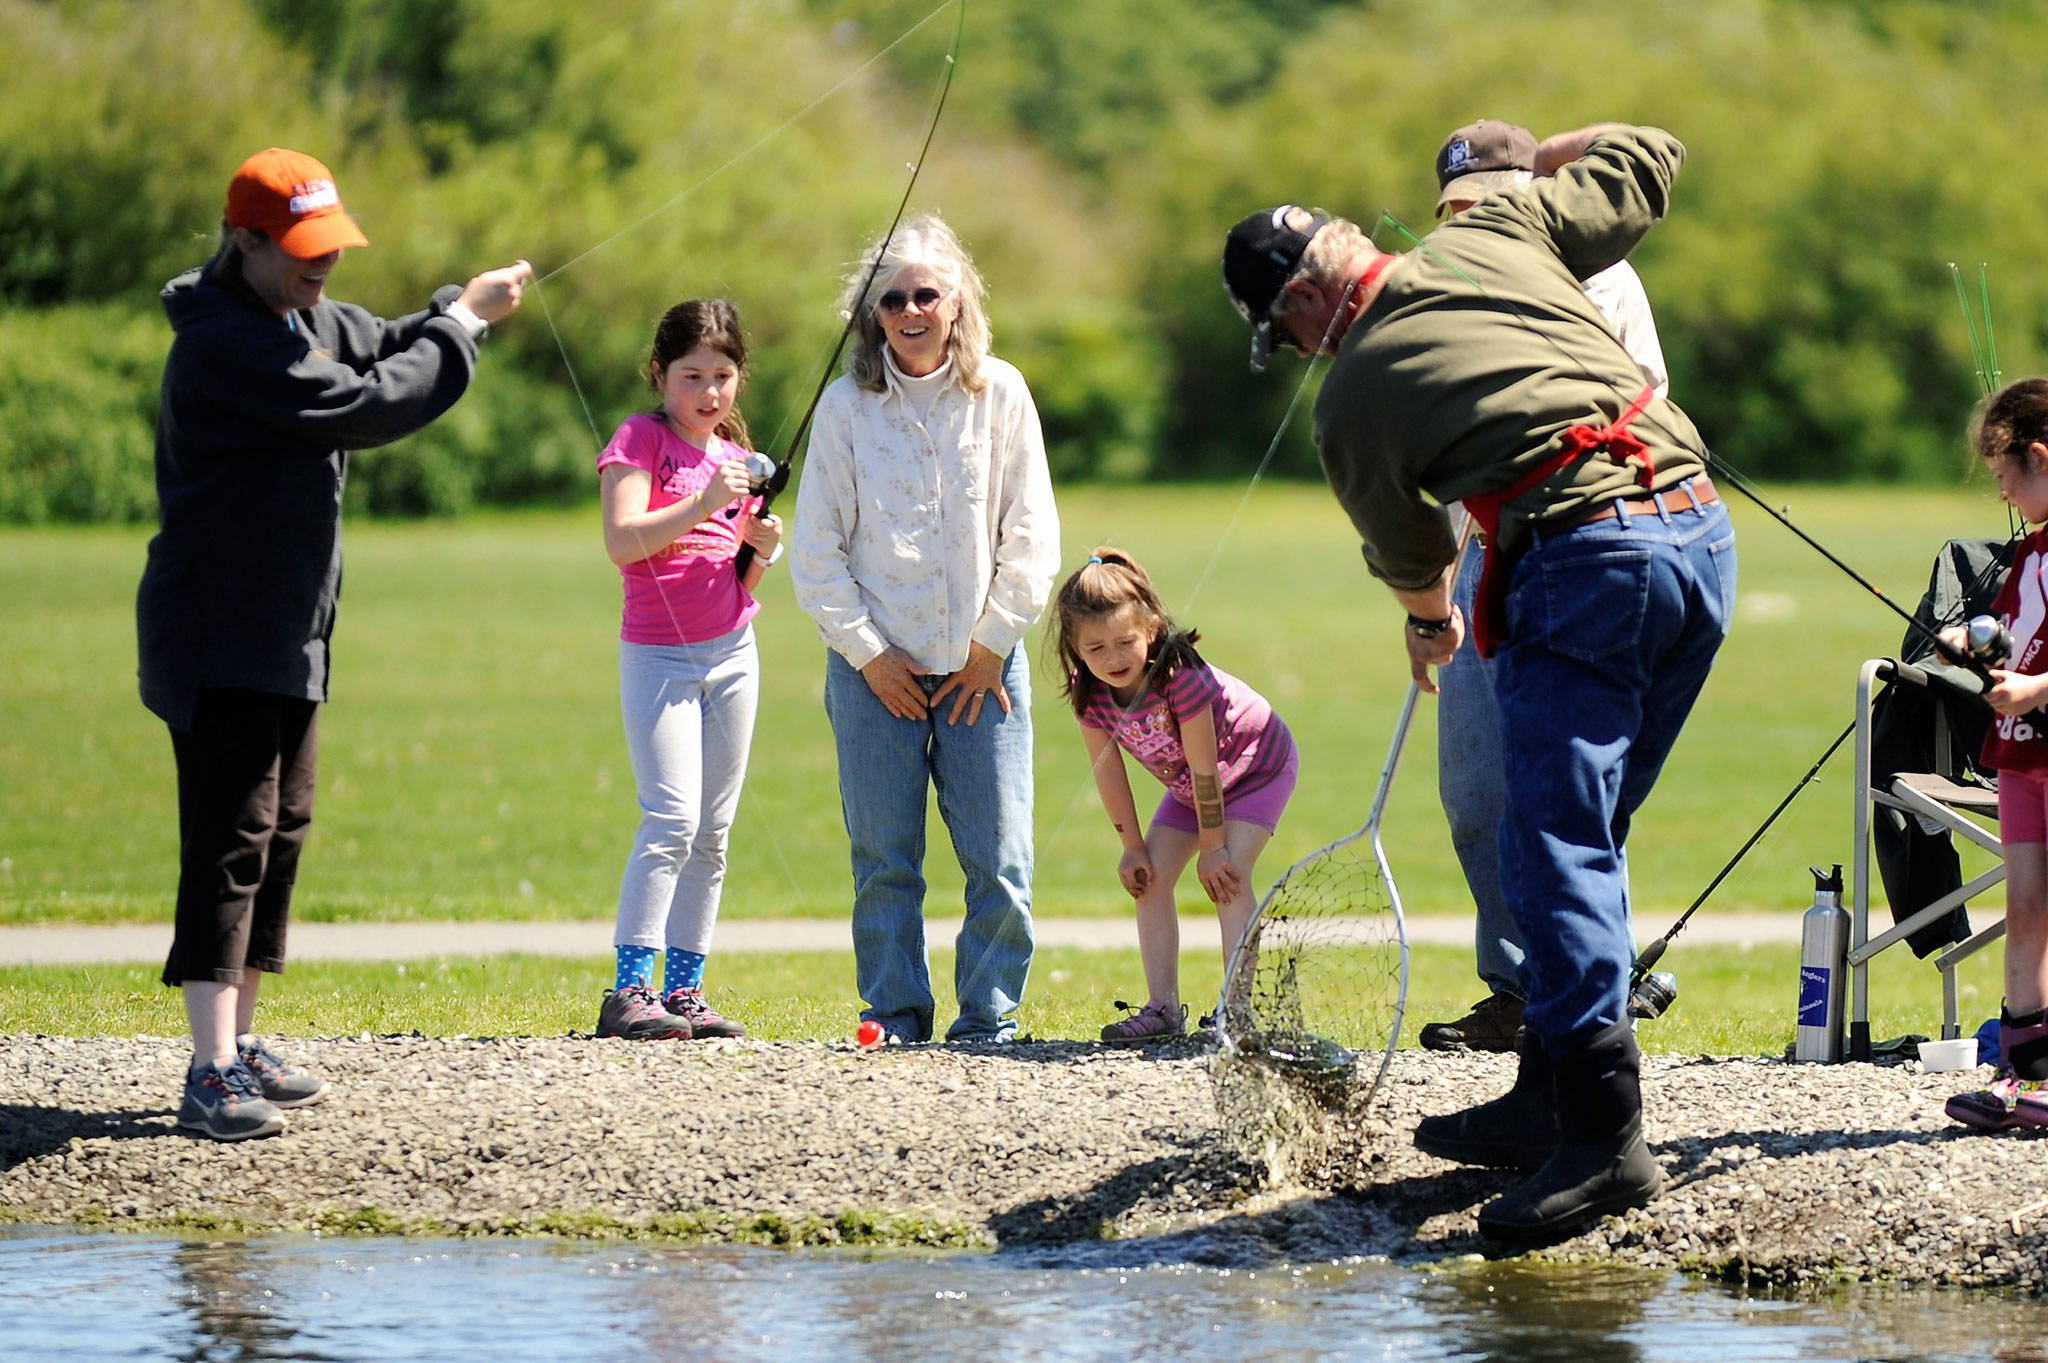 Sadie Miller, 8, of Port Angeles, brings in a fish with help from her mom Amy and Ron Hayes of the Puget Sound Anglers of the North Olympic Peninsula Chapter as her cousin Harper Hilliker, 5, and grandma Bonnie McCloskey watch in anticipation. Sadie and Harper were one of hundreds of children to participate at Kids’ Fishing Day on May 20 in the Water Reuse Demonstration Park pond north of Carrie Blake Park. Sequim Gazette photo by Matthew Nash